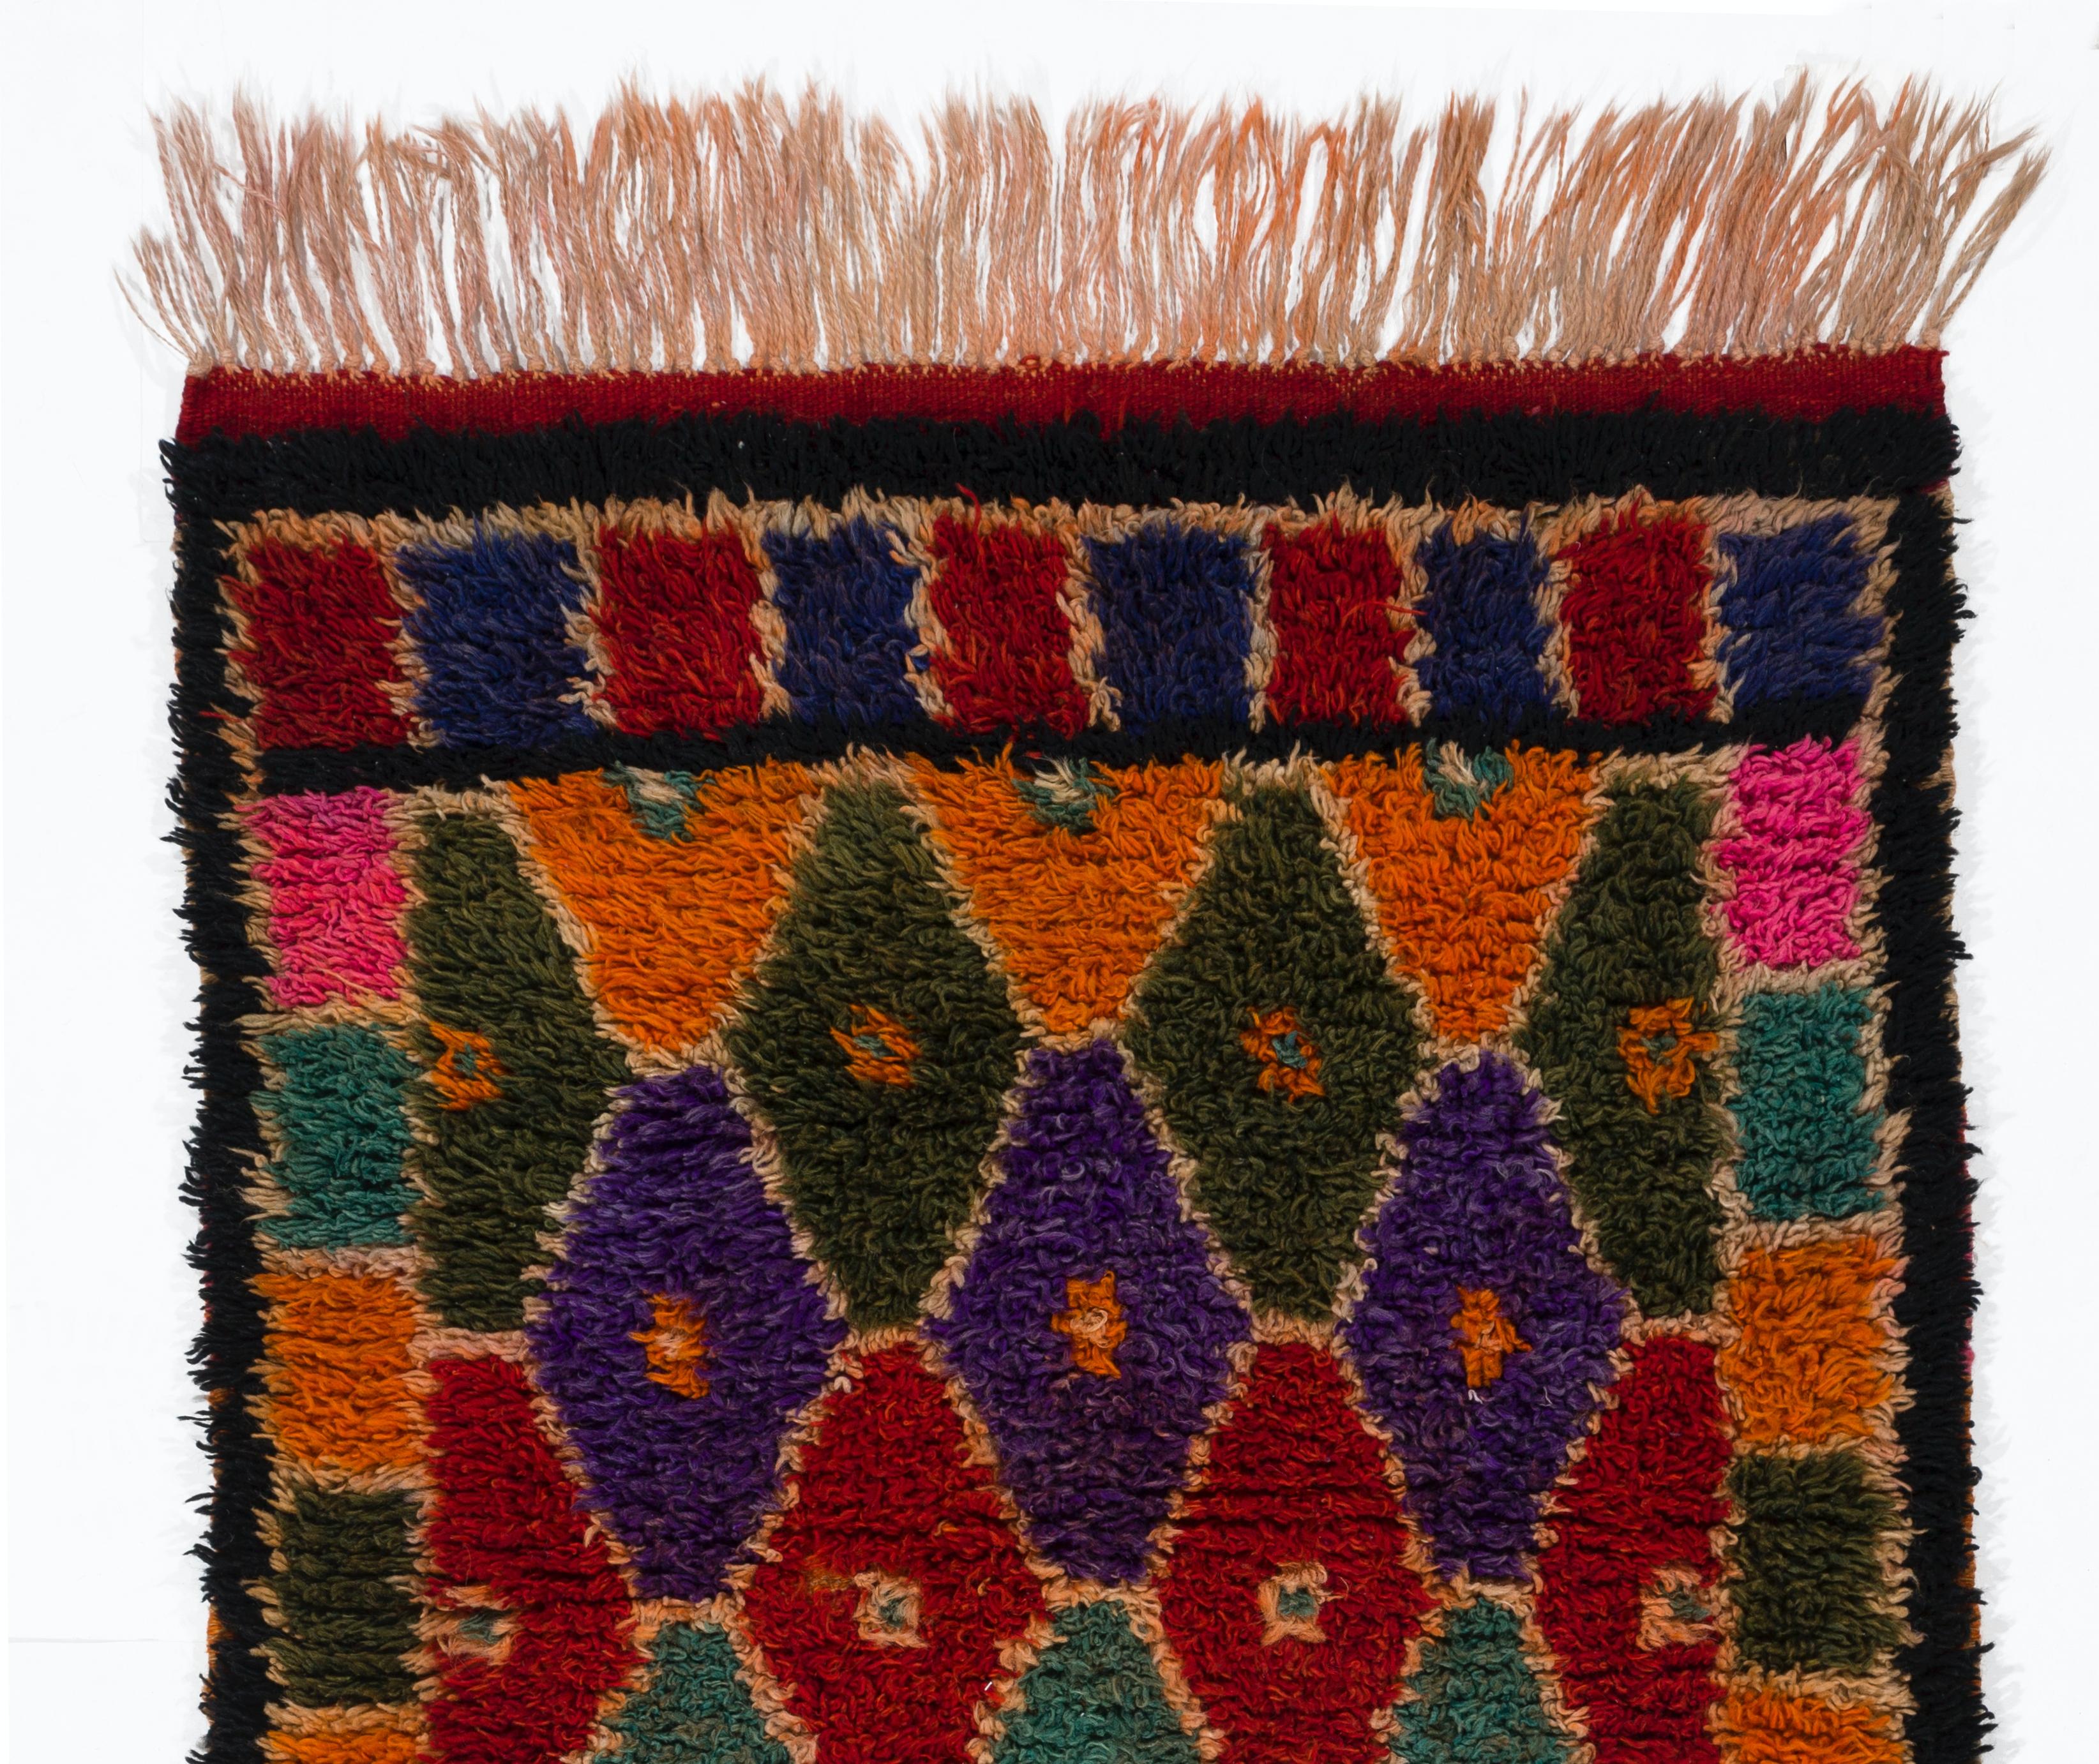 A vintage hand-knotted Tulu (thick-piled) rug from Konya in Central Turkey. The rug is made of hand-spun lamb’s wool, is very soft and feels comfortable under your feet. It features an overall lozenge pattern in a lively, energetic, eye-catching